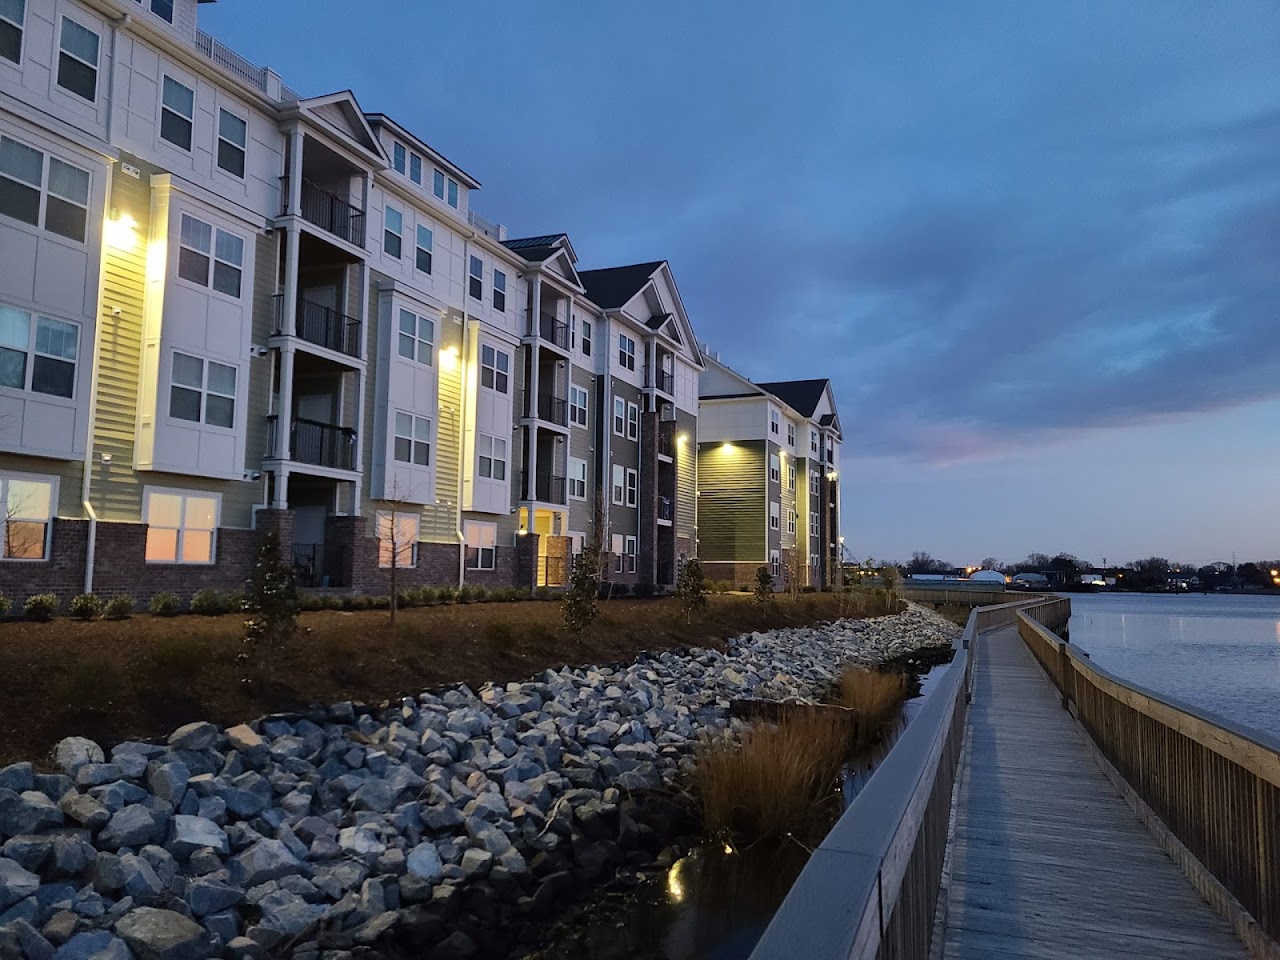 Photo of RETREAT AT HARBOR POINTE. Affordable housing located at 360 HARBOR POINTE COURT NORFOLK, VA 23523